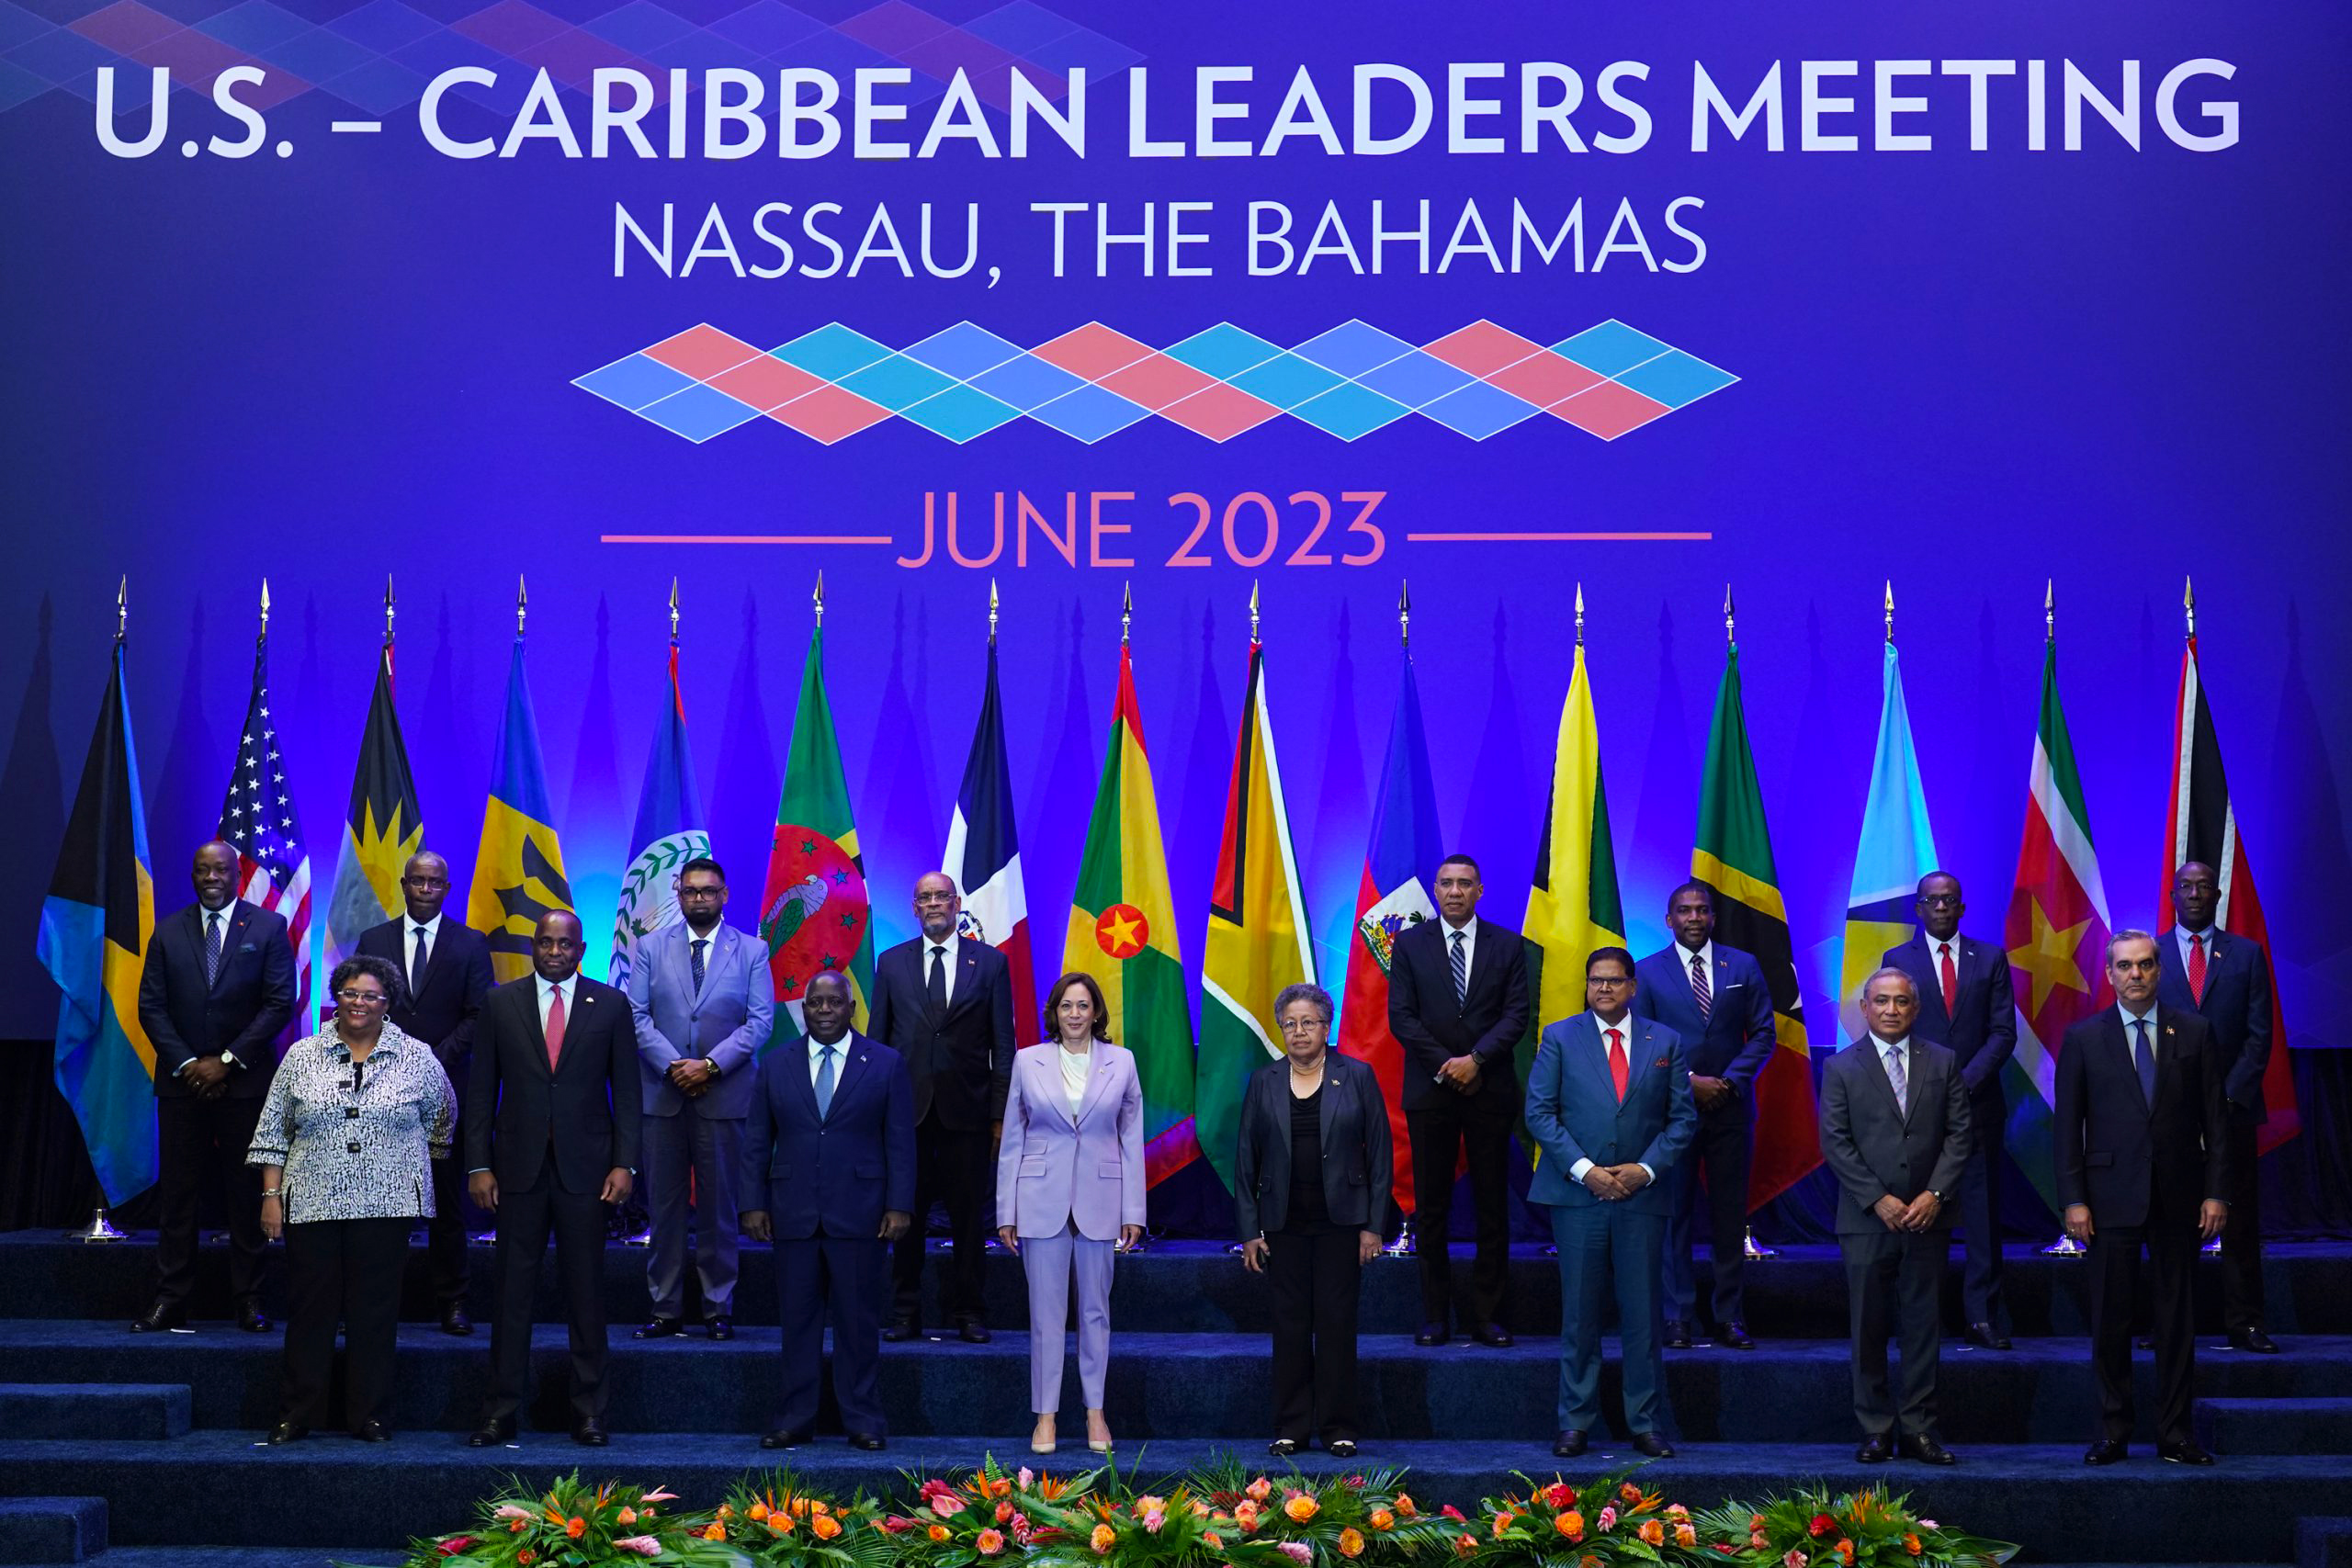 Vice President Kamala Harris, Caribbean Leaders Meeting, Nassau The Bahamas June 8, 2023 - Commits $100 Million In New Investment In The Region